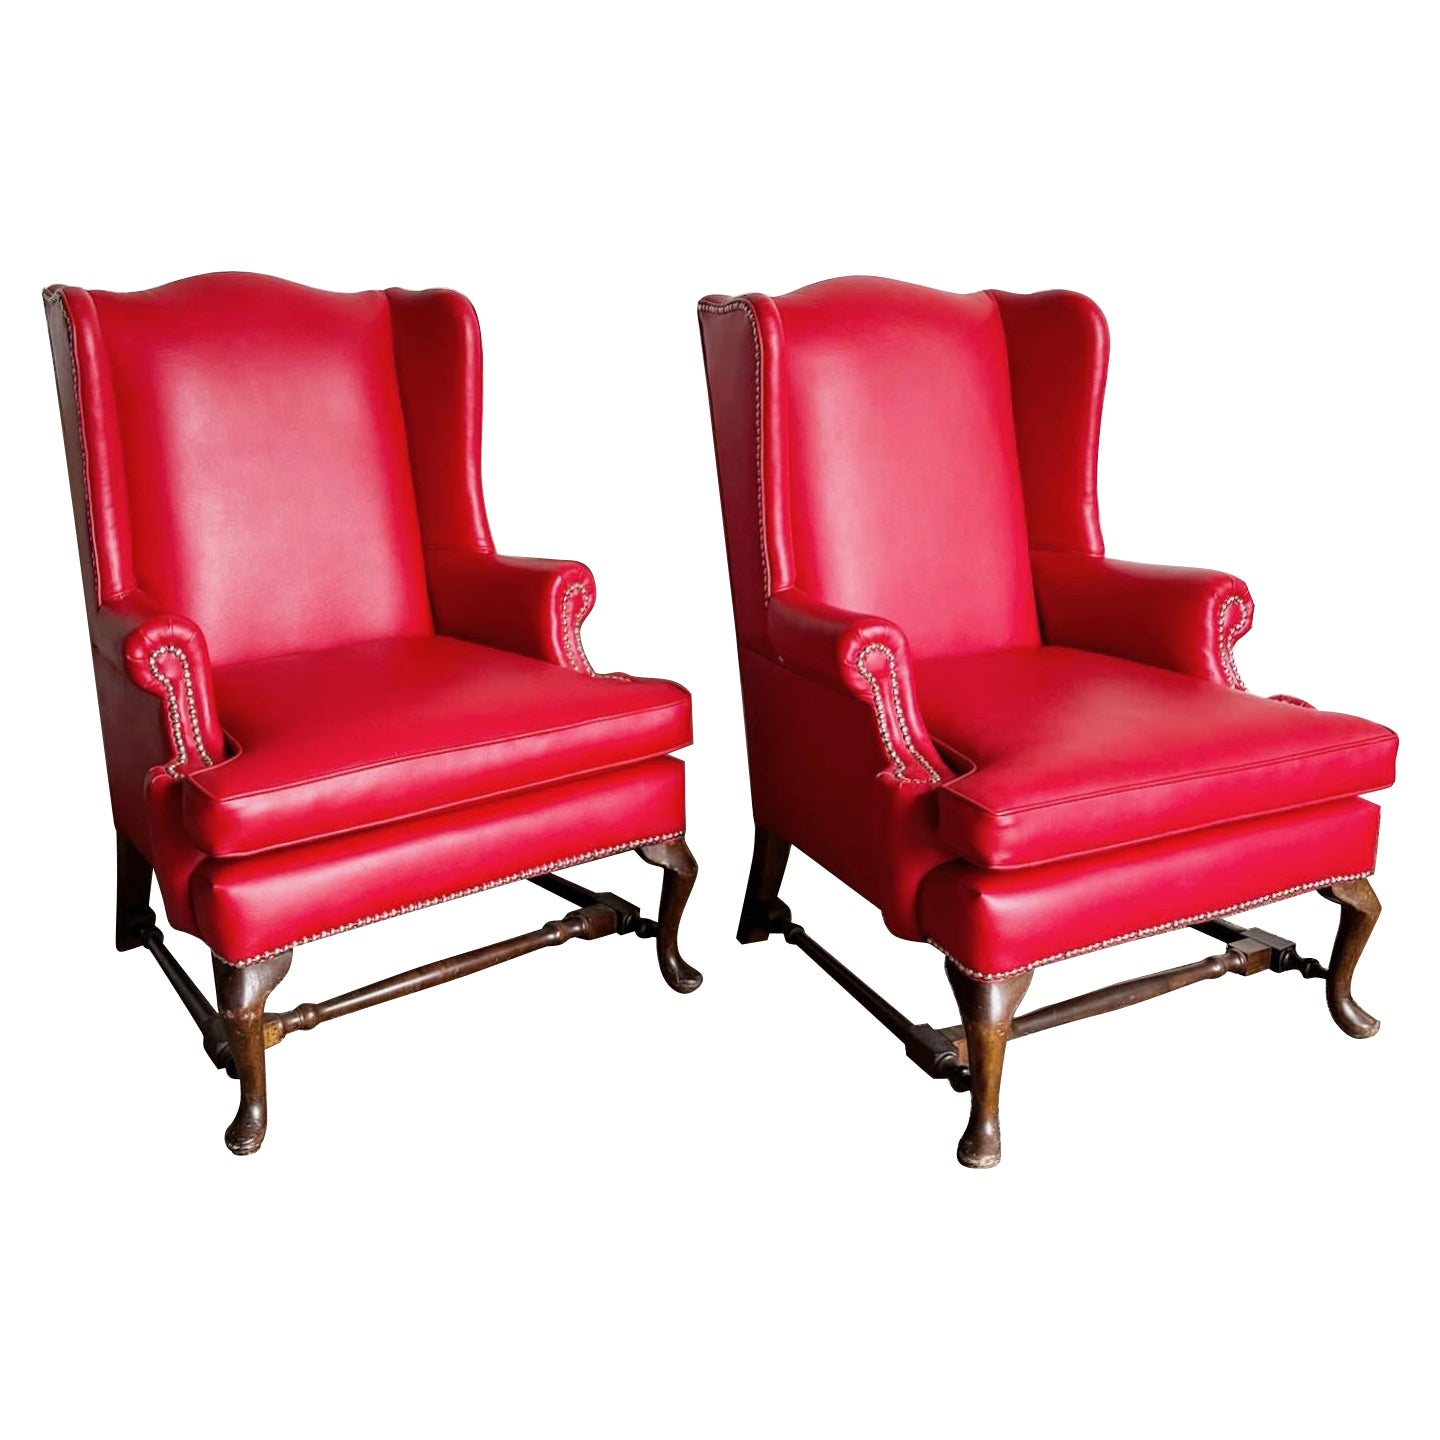 Traditional Red Faux Leather Wingback Chairs - a Pair For Sale